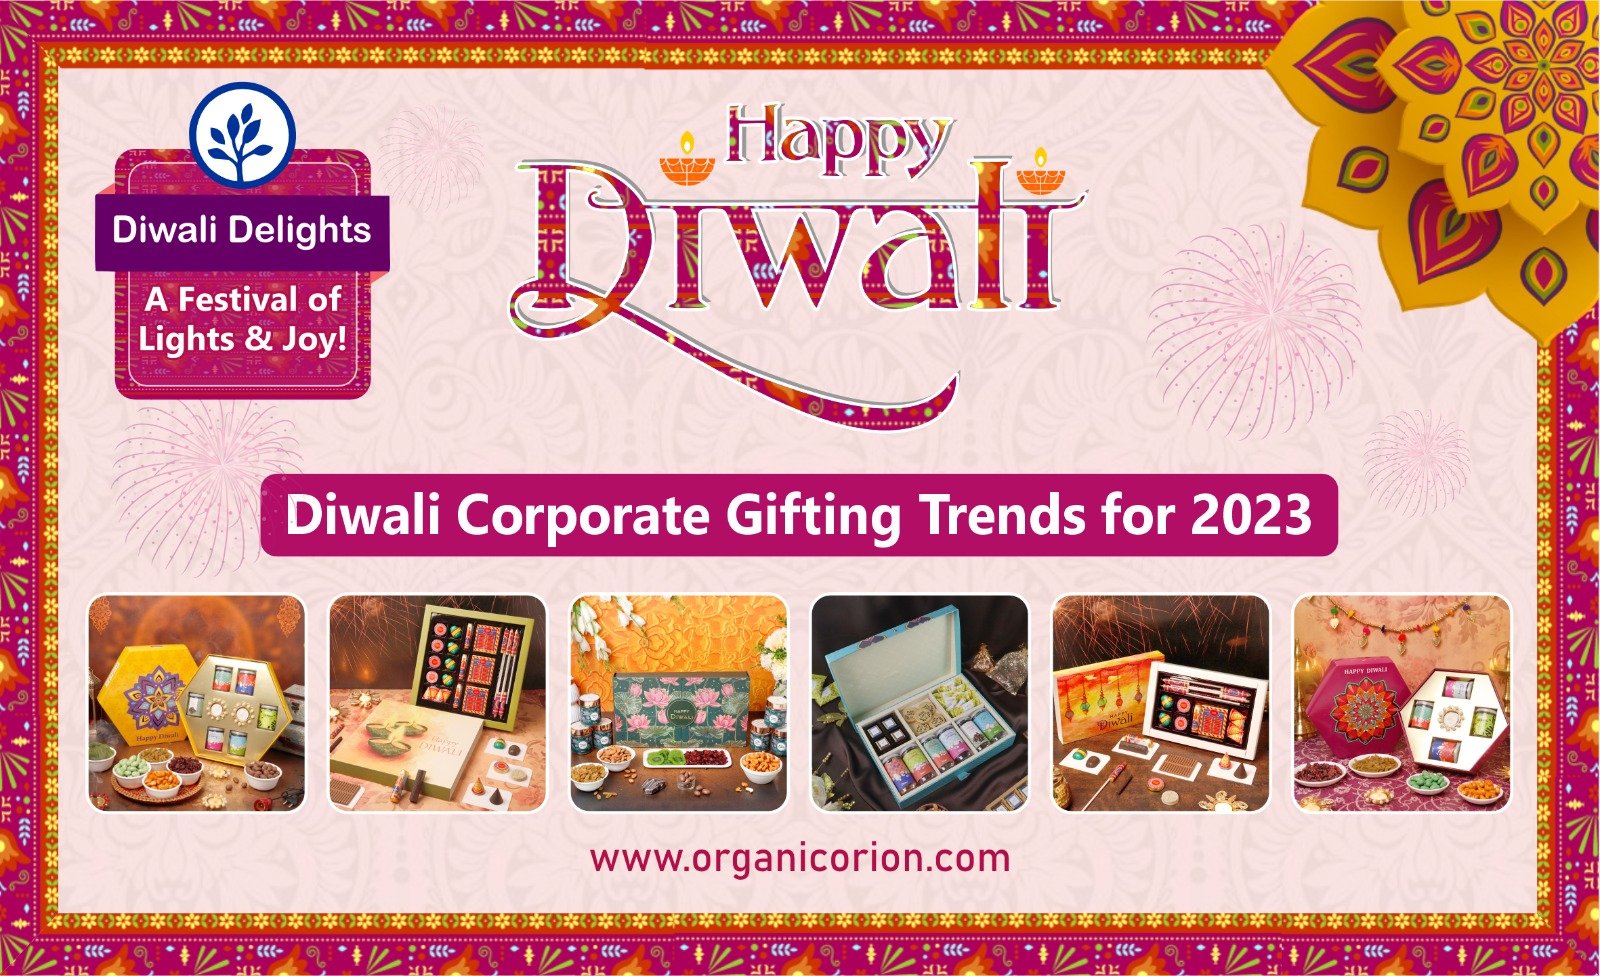 Diwali Corporate Gifting Trends for 2023